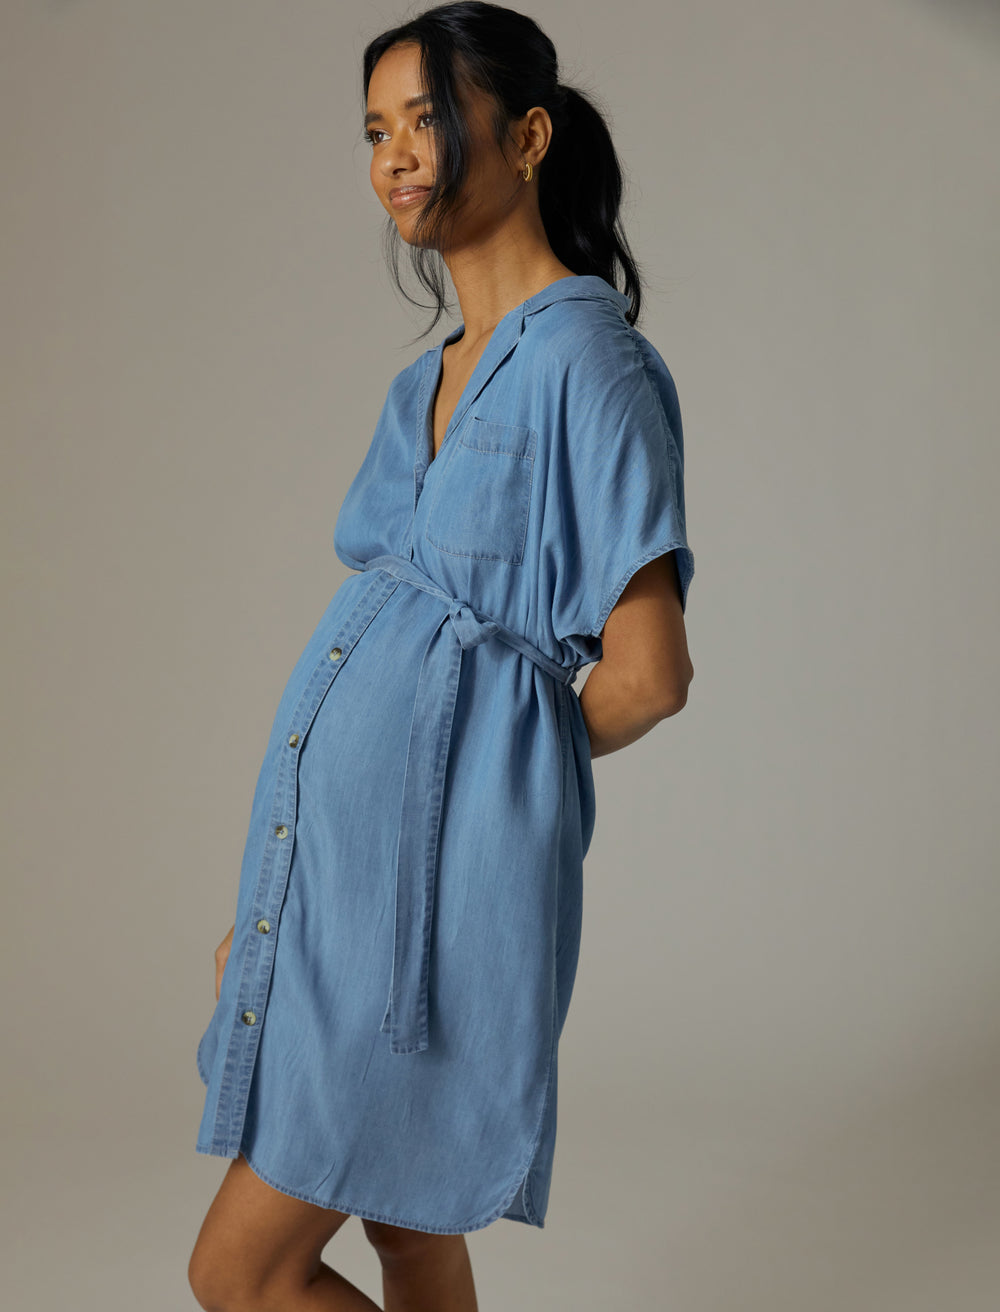 206 spring maternity outfit with knit dress and chambray shirt